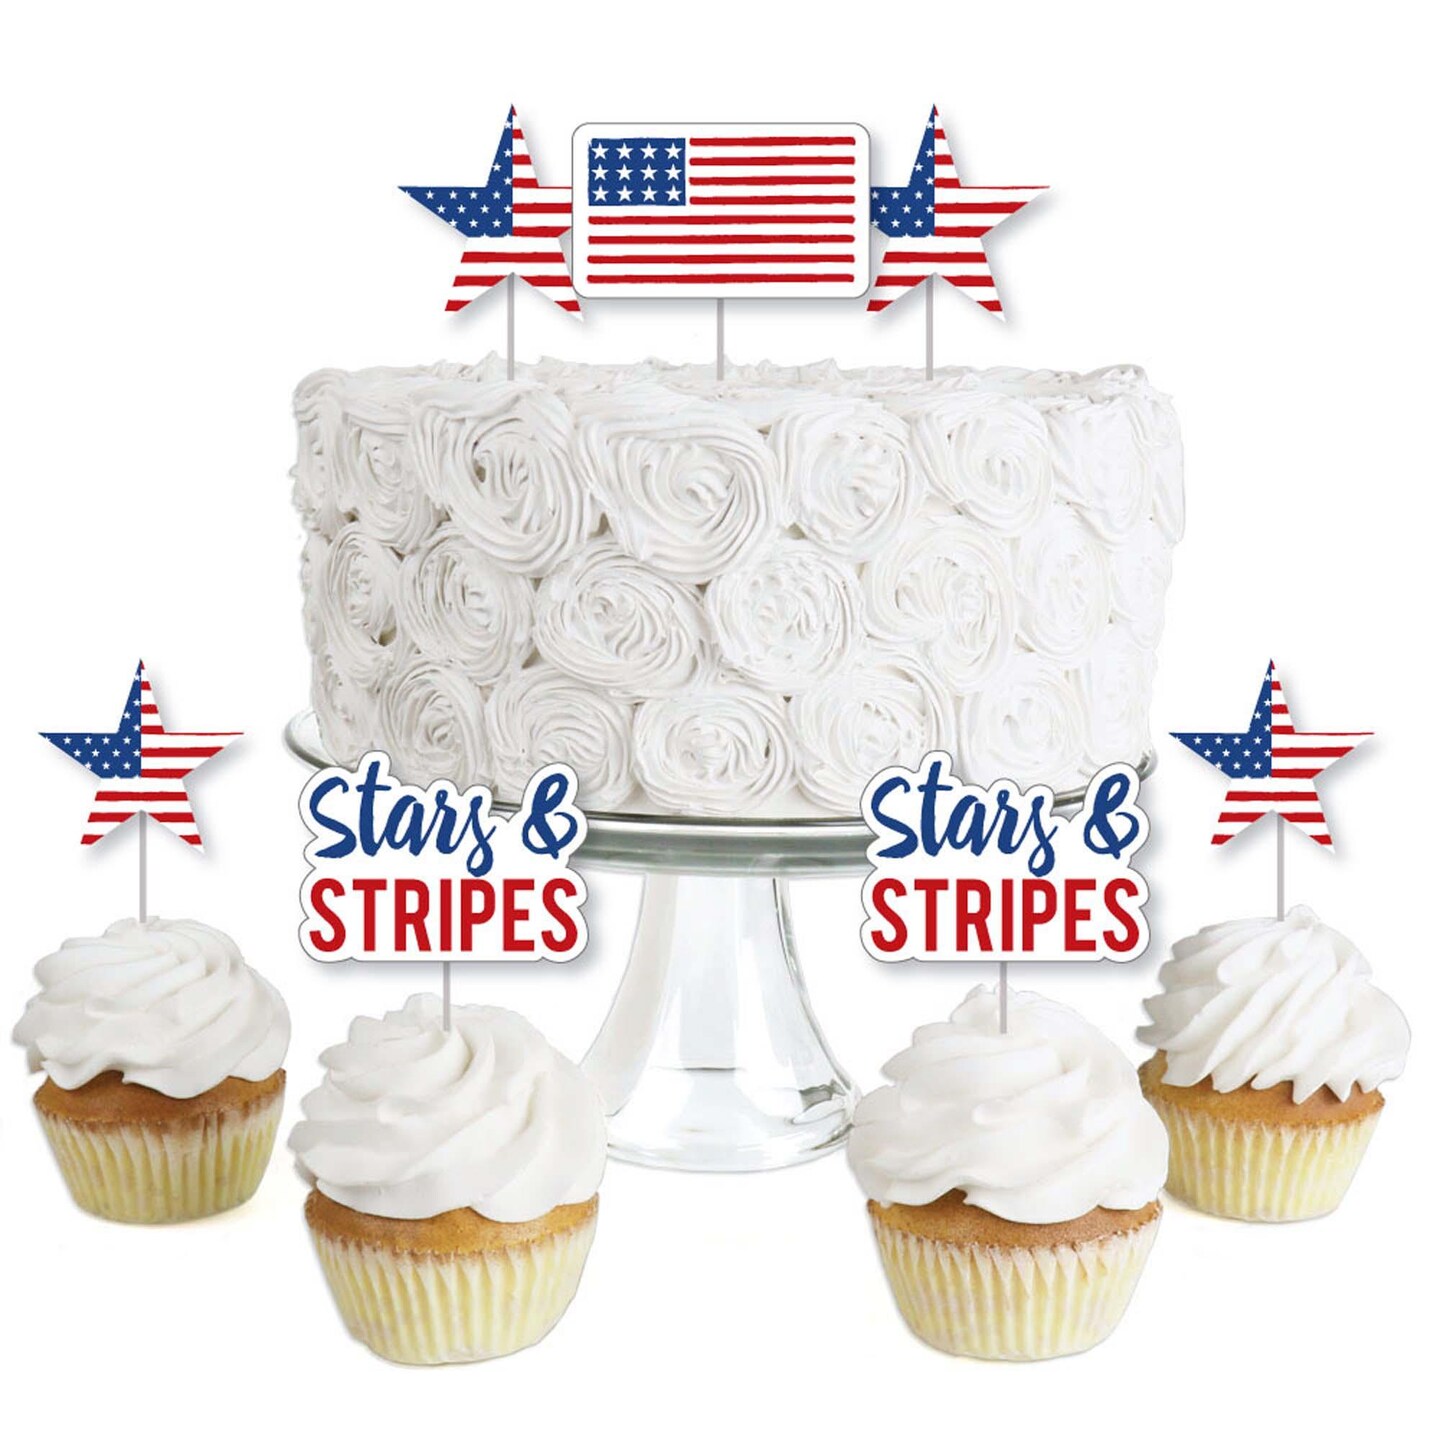 Free Printable Patriotic Cupcake Toppers for Independence Day Celebrations!  - The Birch Cottage